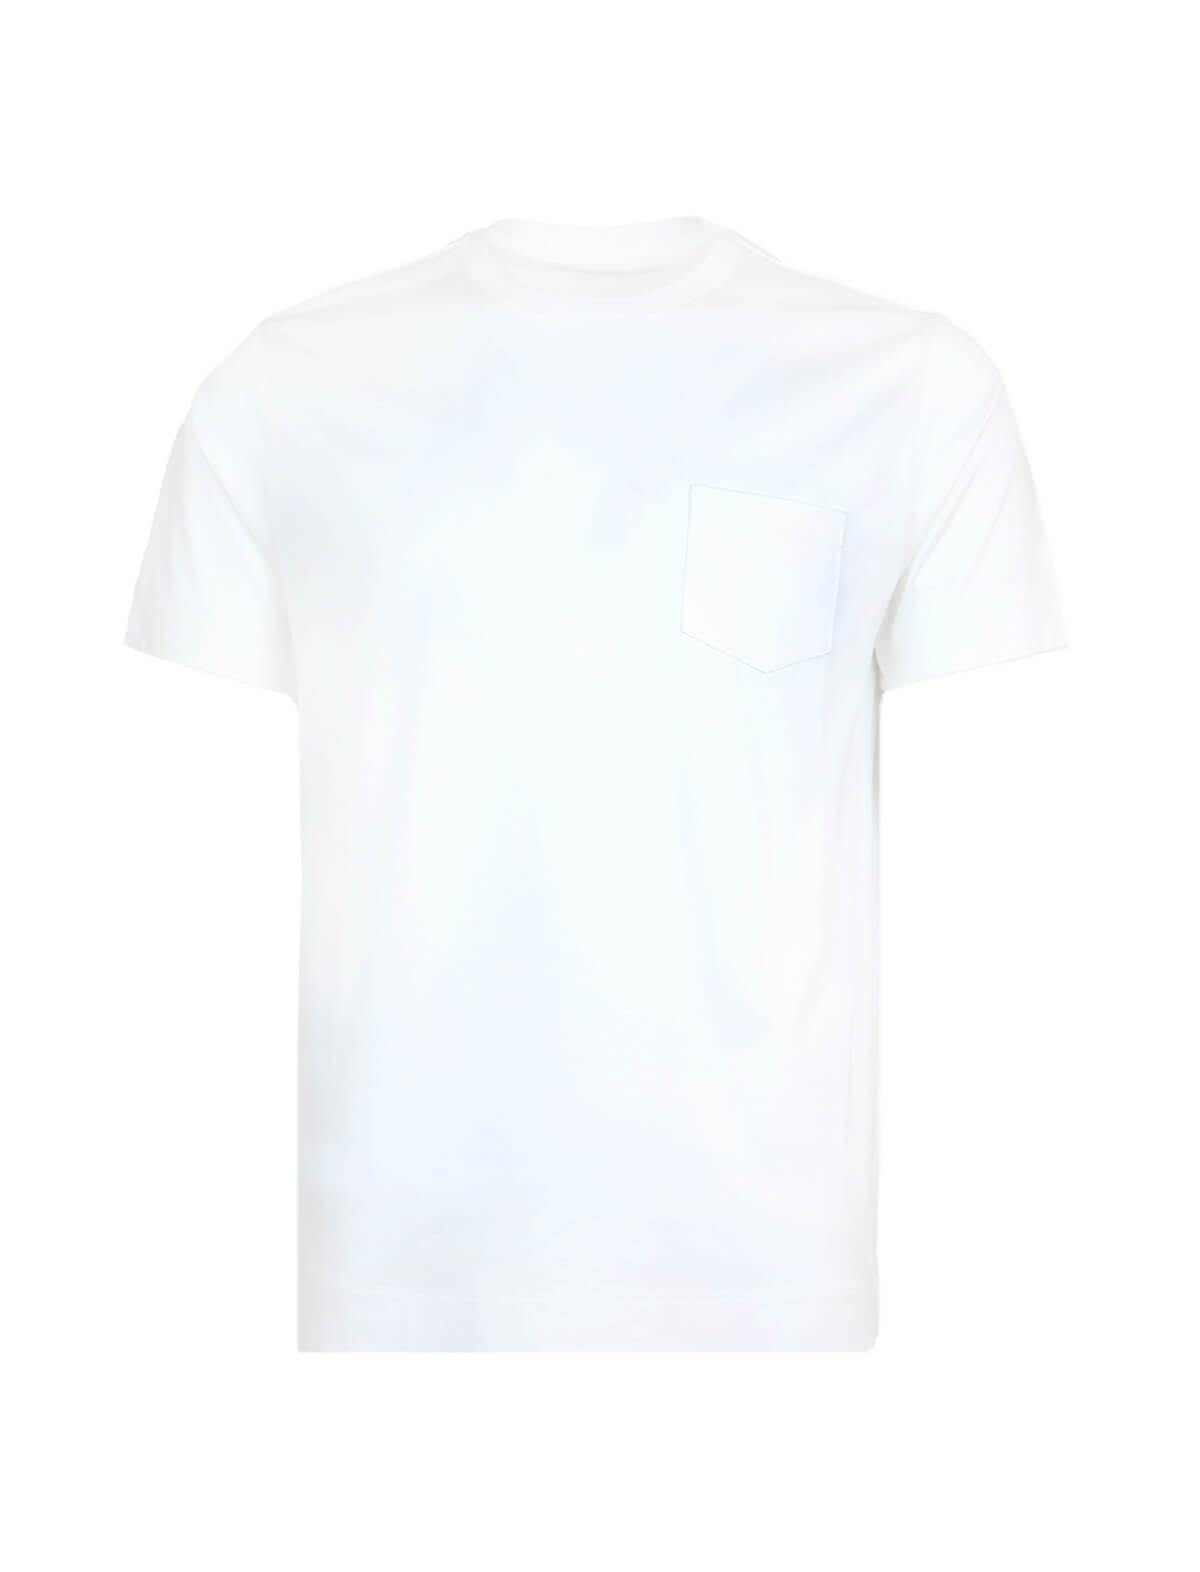 CIRCOLO 1901 Cotton T-Shirt with Front Pocket in White | CLOSET Singapore